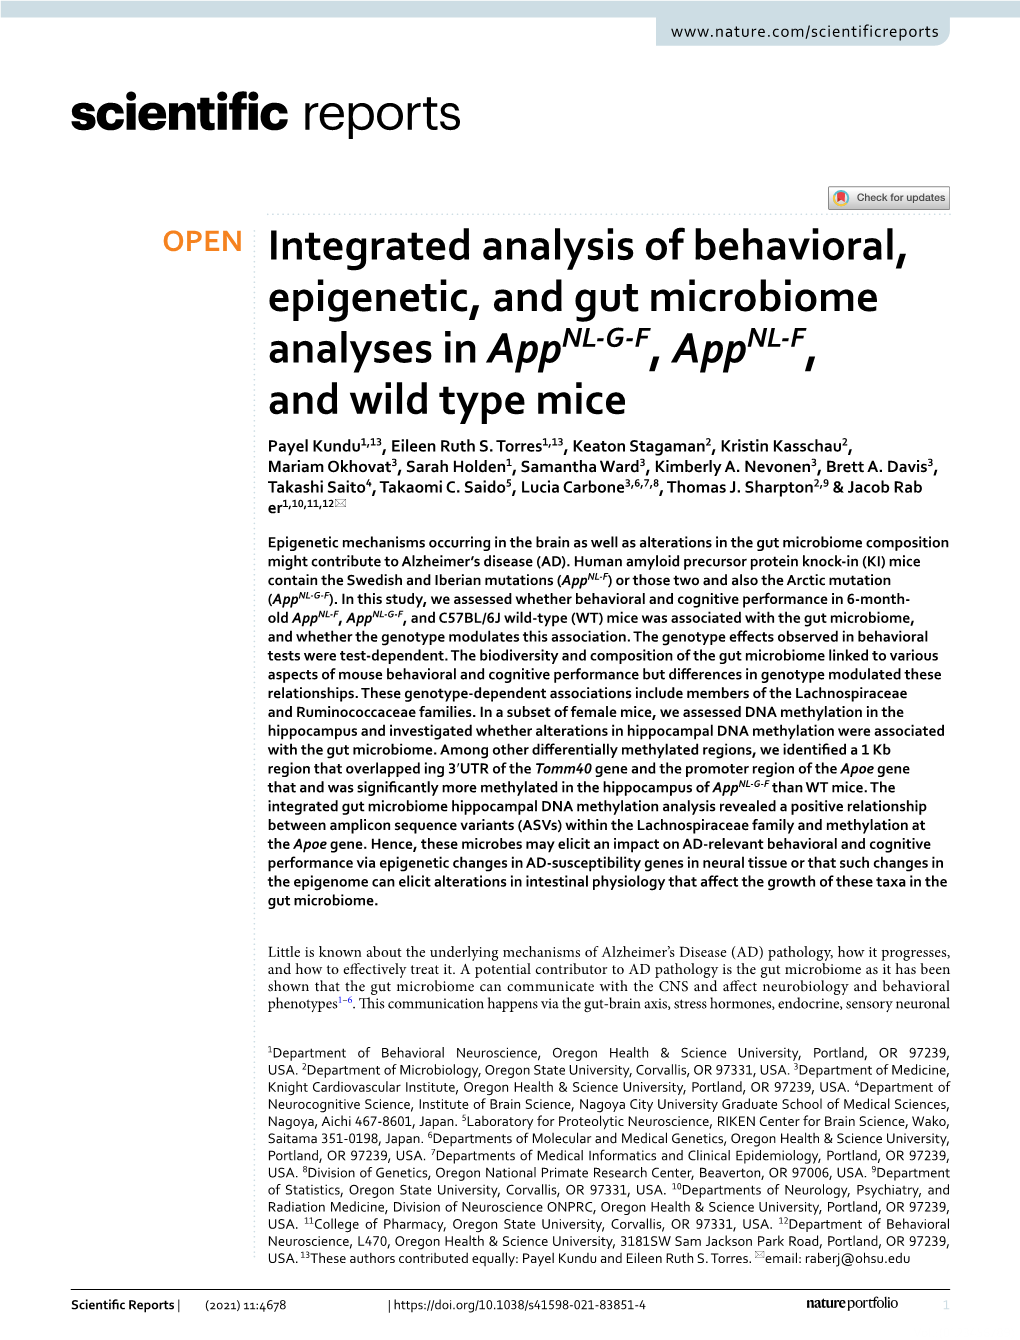 Integrated Analysis of Behavioral, Epigenetic, and Gut Microbiome Analyses in Appnl‑G‑F, Appnl‑F, and Wild Type Mice Payel Kundu1,13, Eileen Ruth S